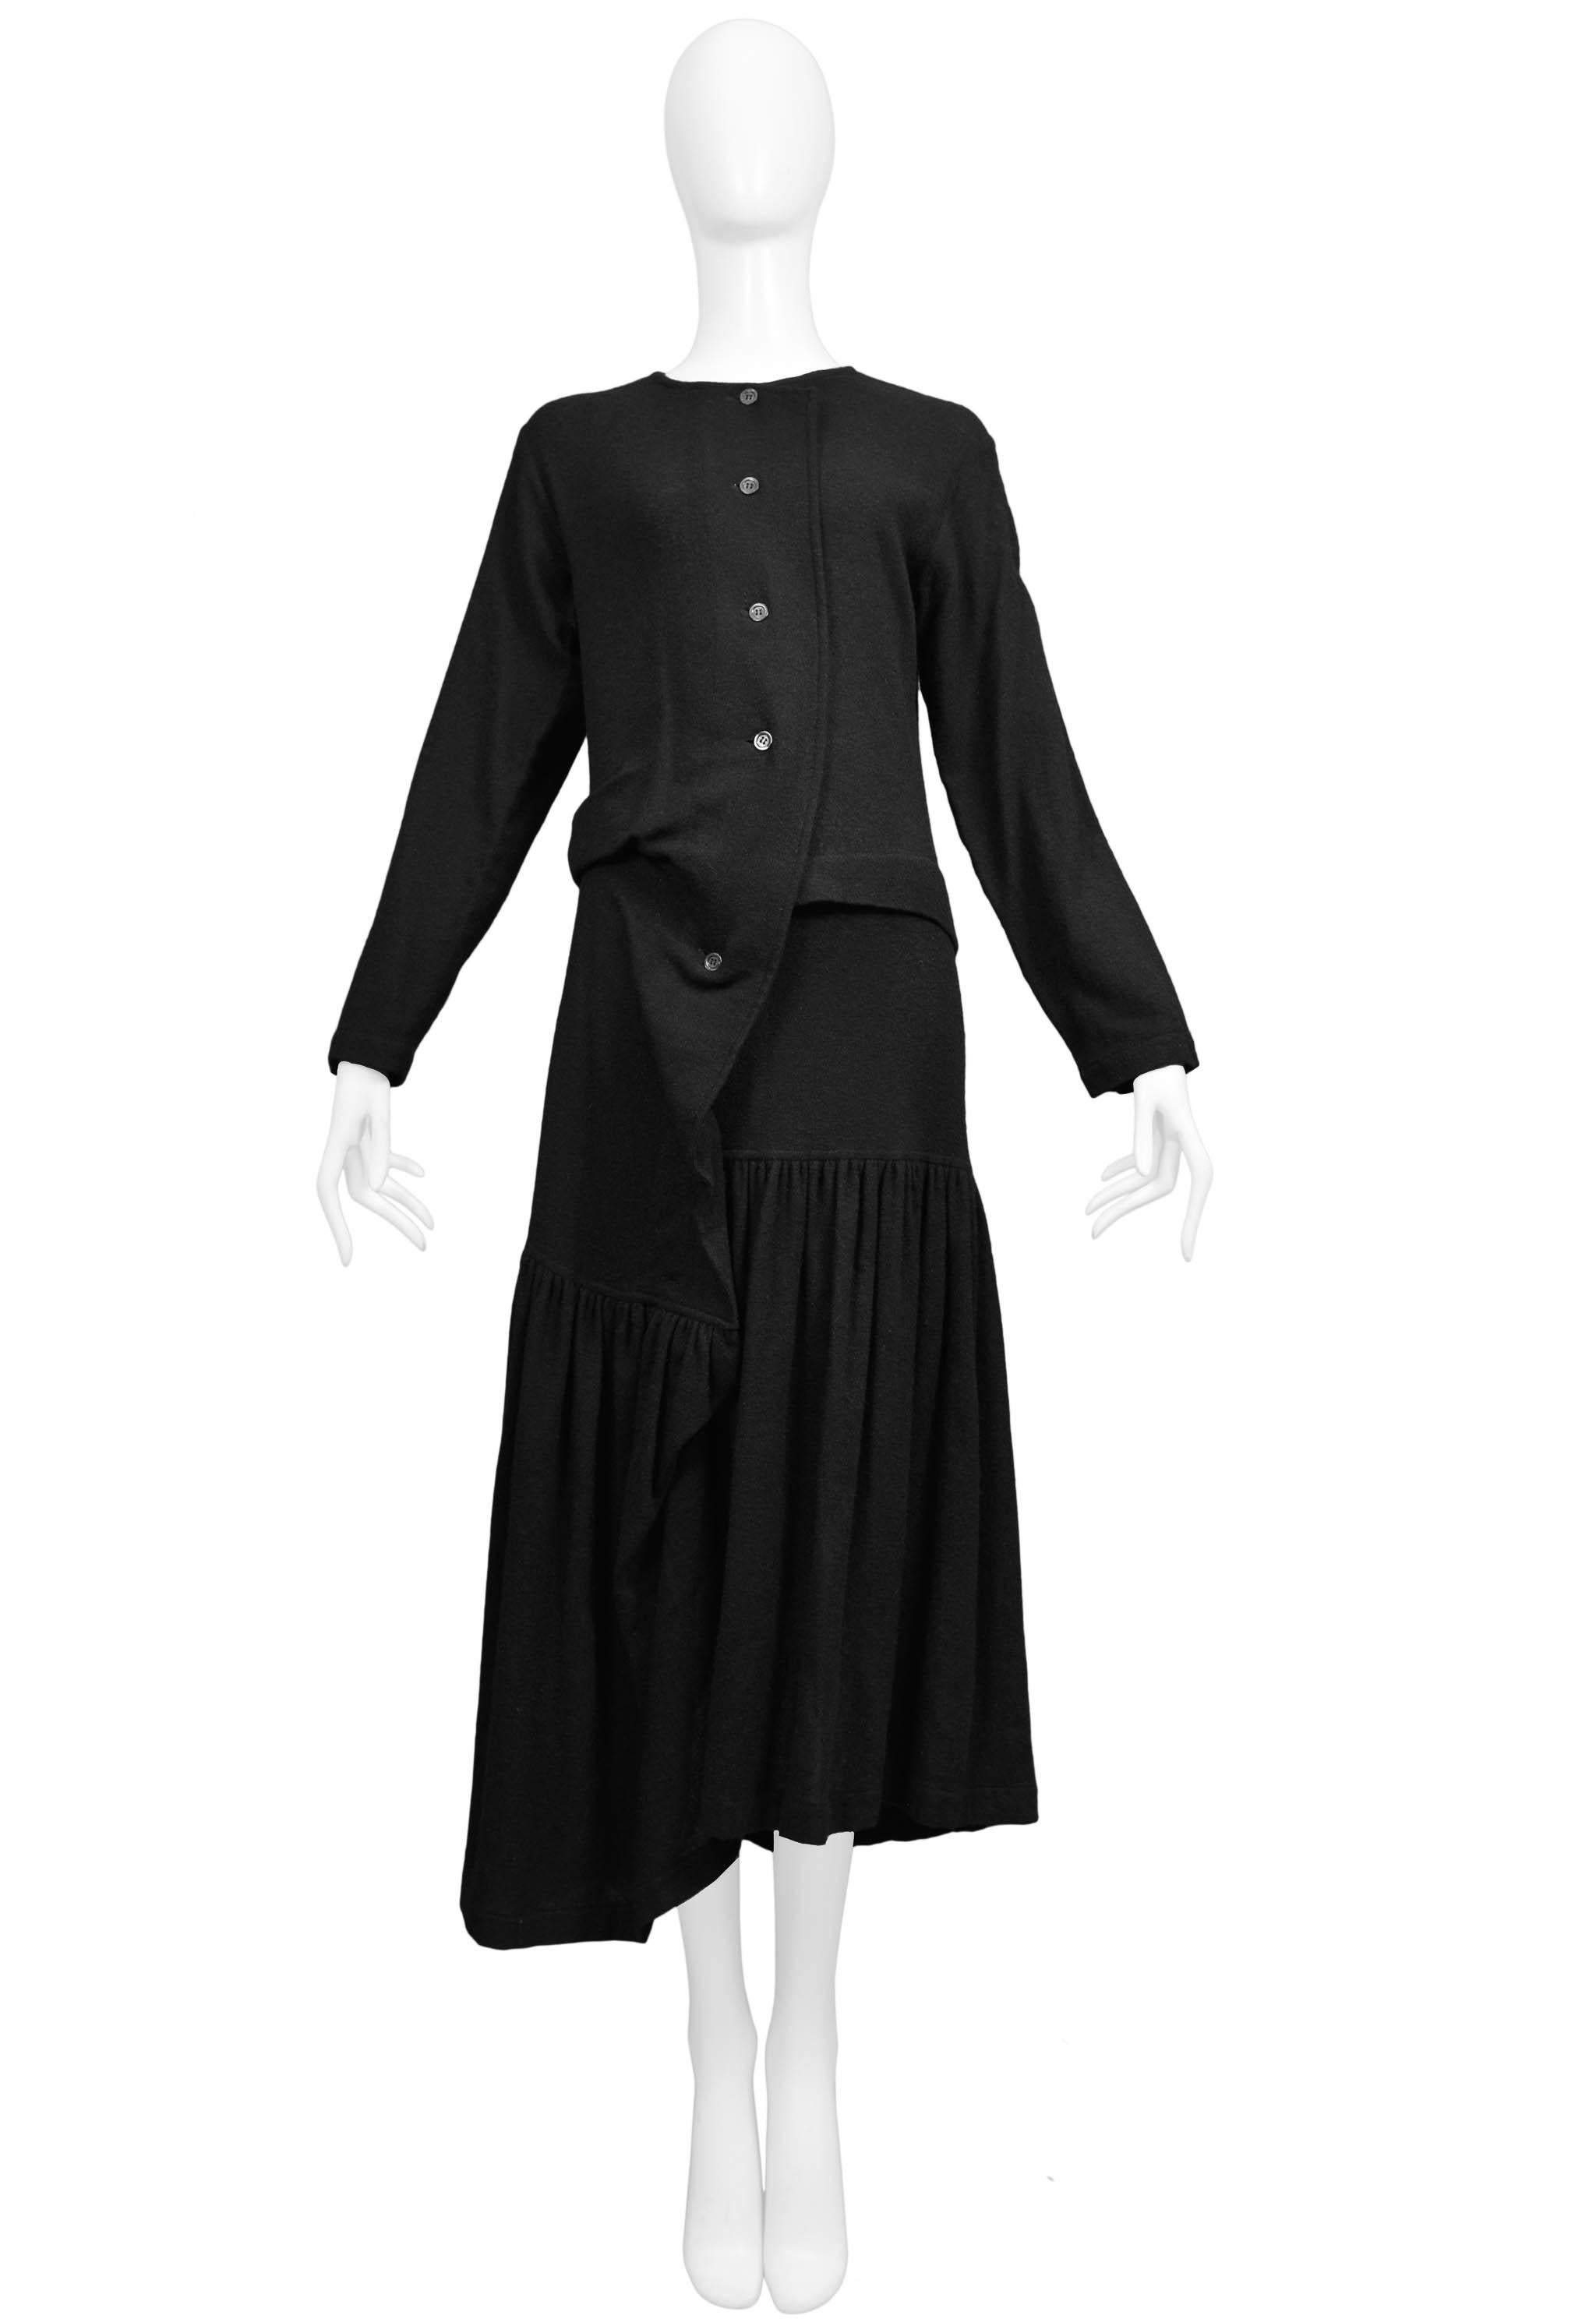 Resurrection Vintage is excited to offer a vintage Comme des Garcons black knit sweater dress featuring an asymmetrical button front, grey buttons, long sleeves, gathered skirt, and an uneven hemline. 

Comme Des Garcons
Size Medium
Wool 
Excellent